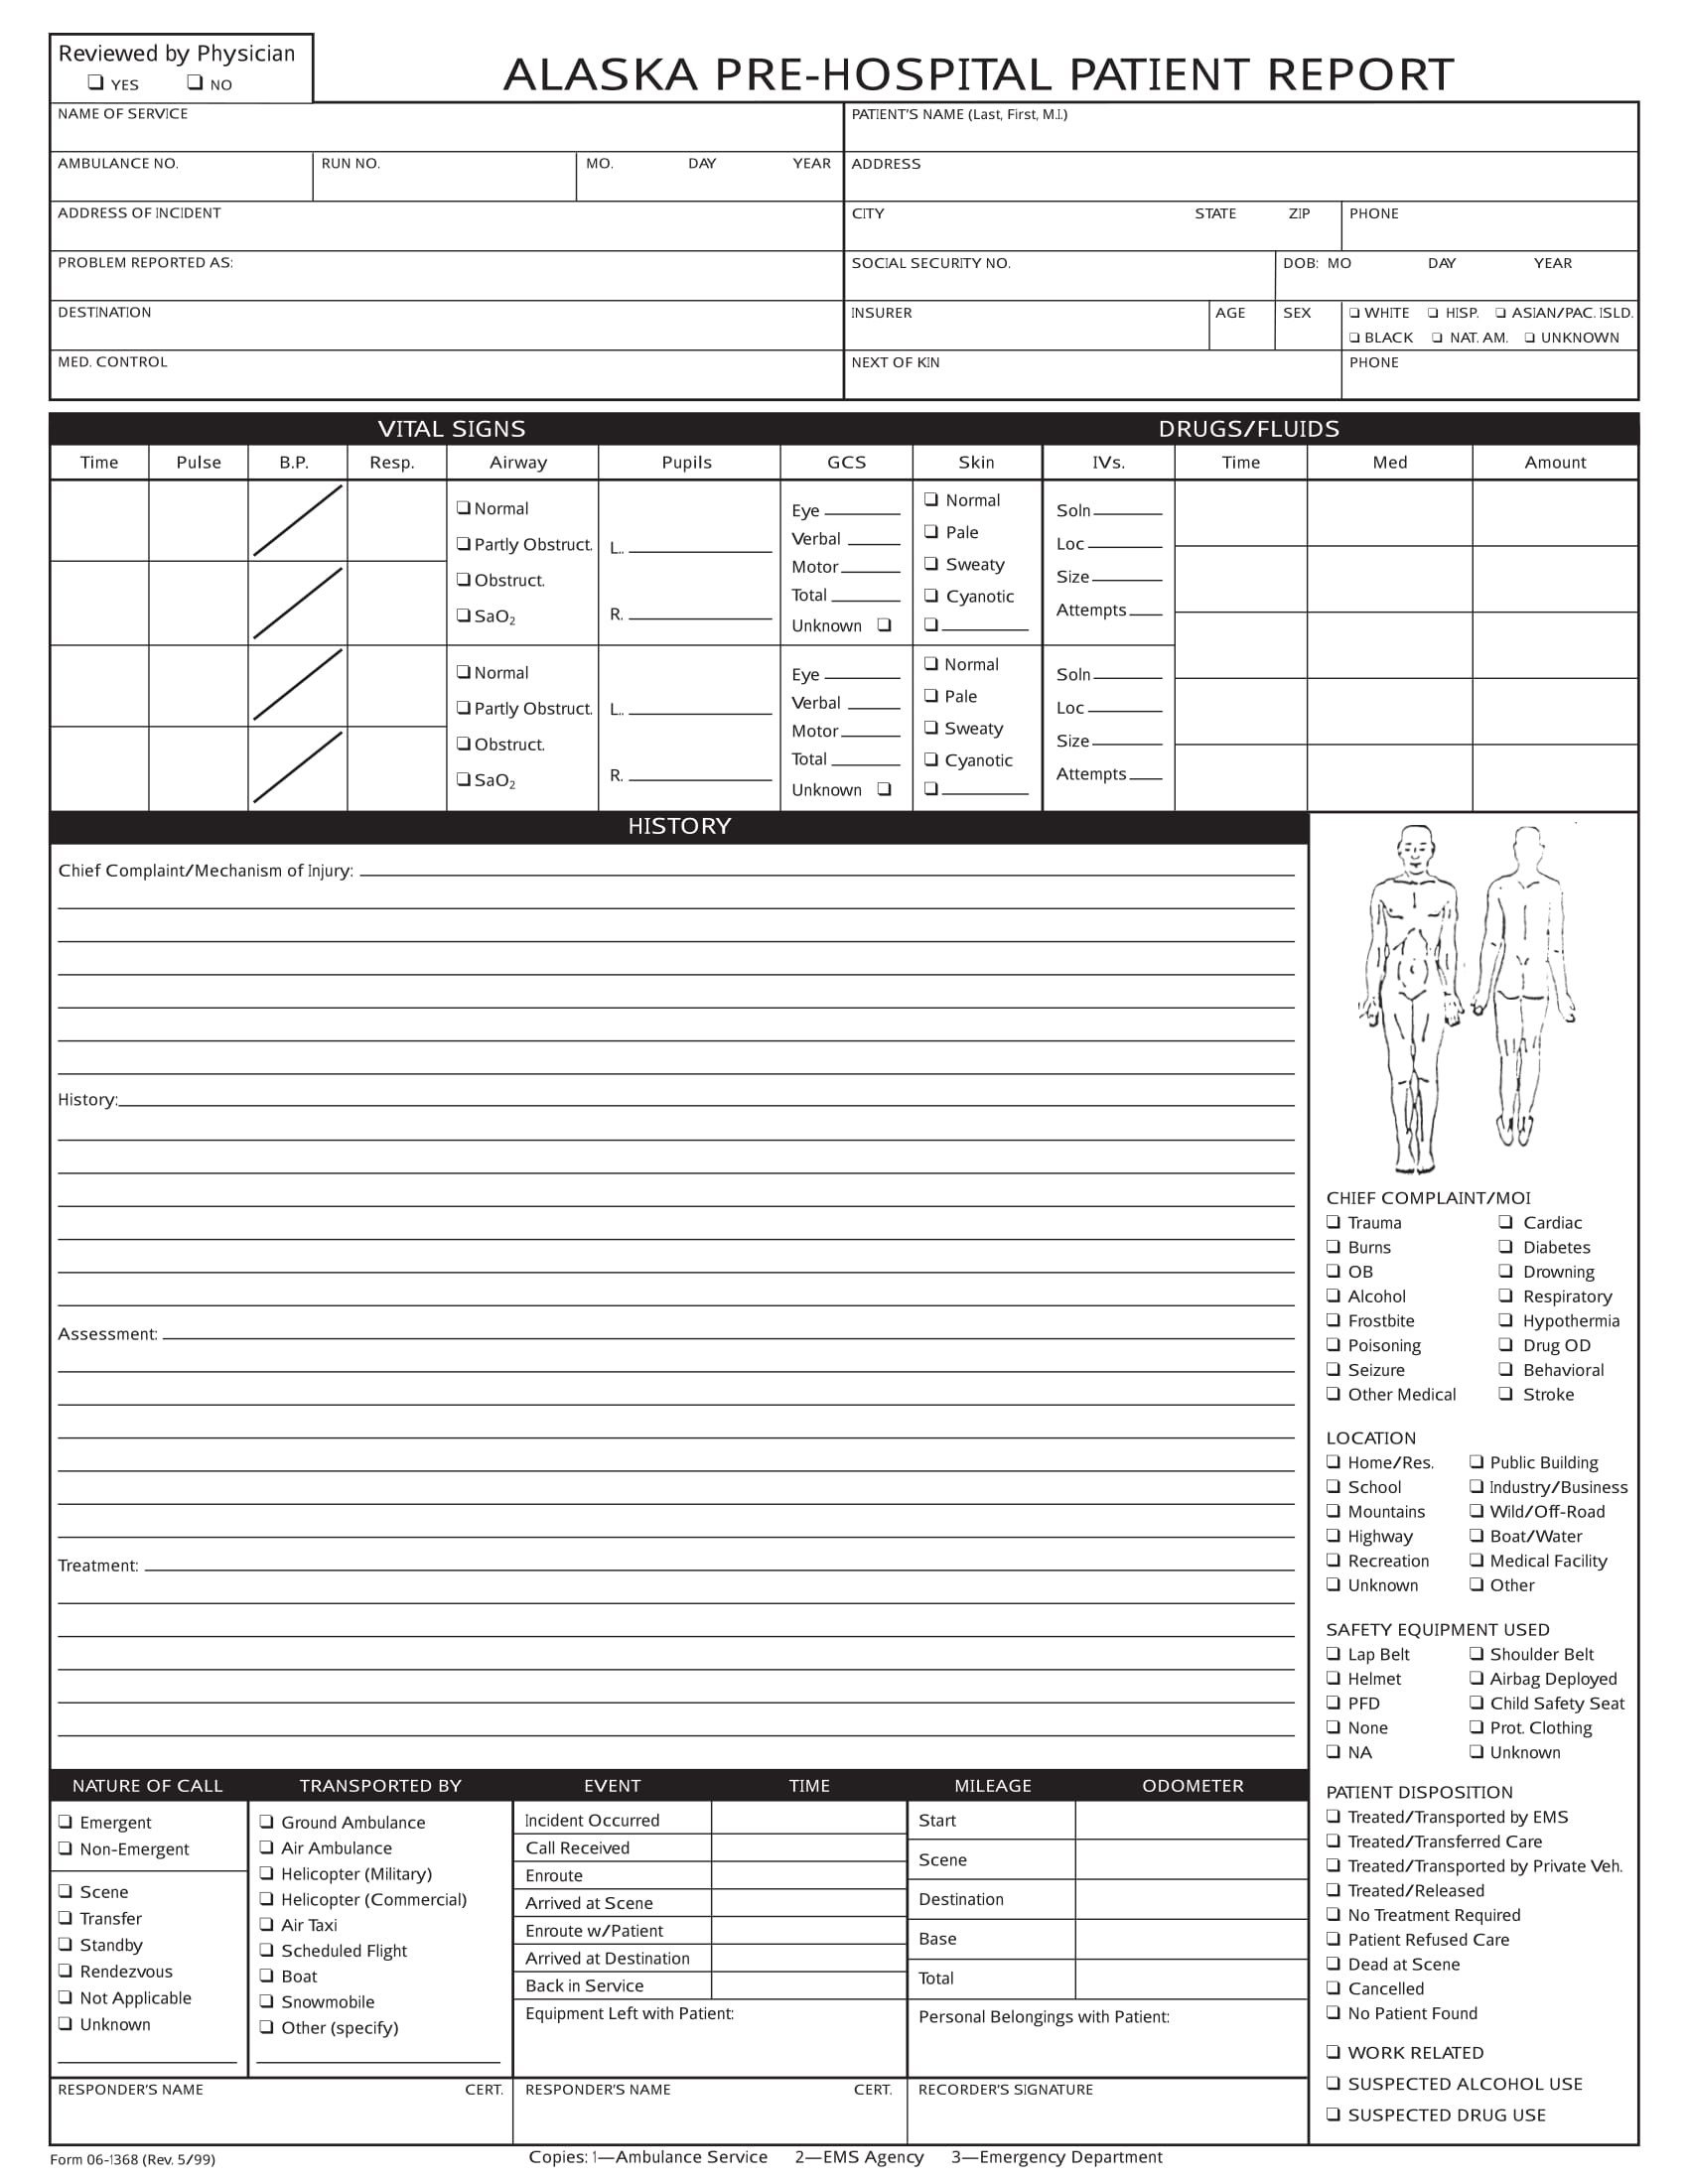 Prehospital Care Report Template 14 Patient Report forms Free Word Pdf format Download